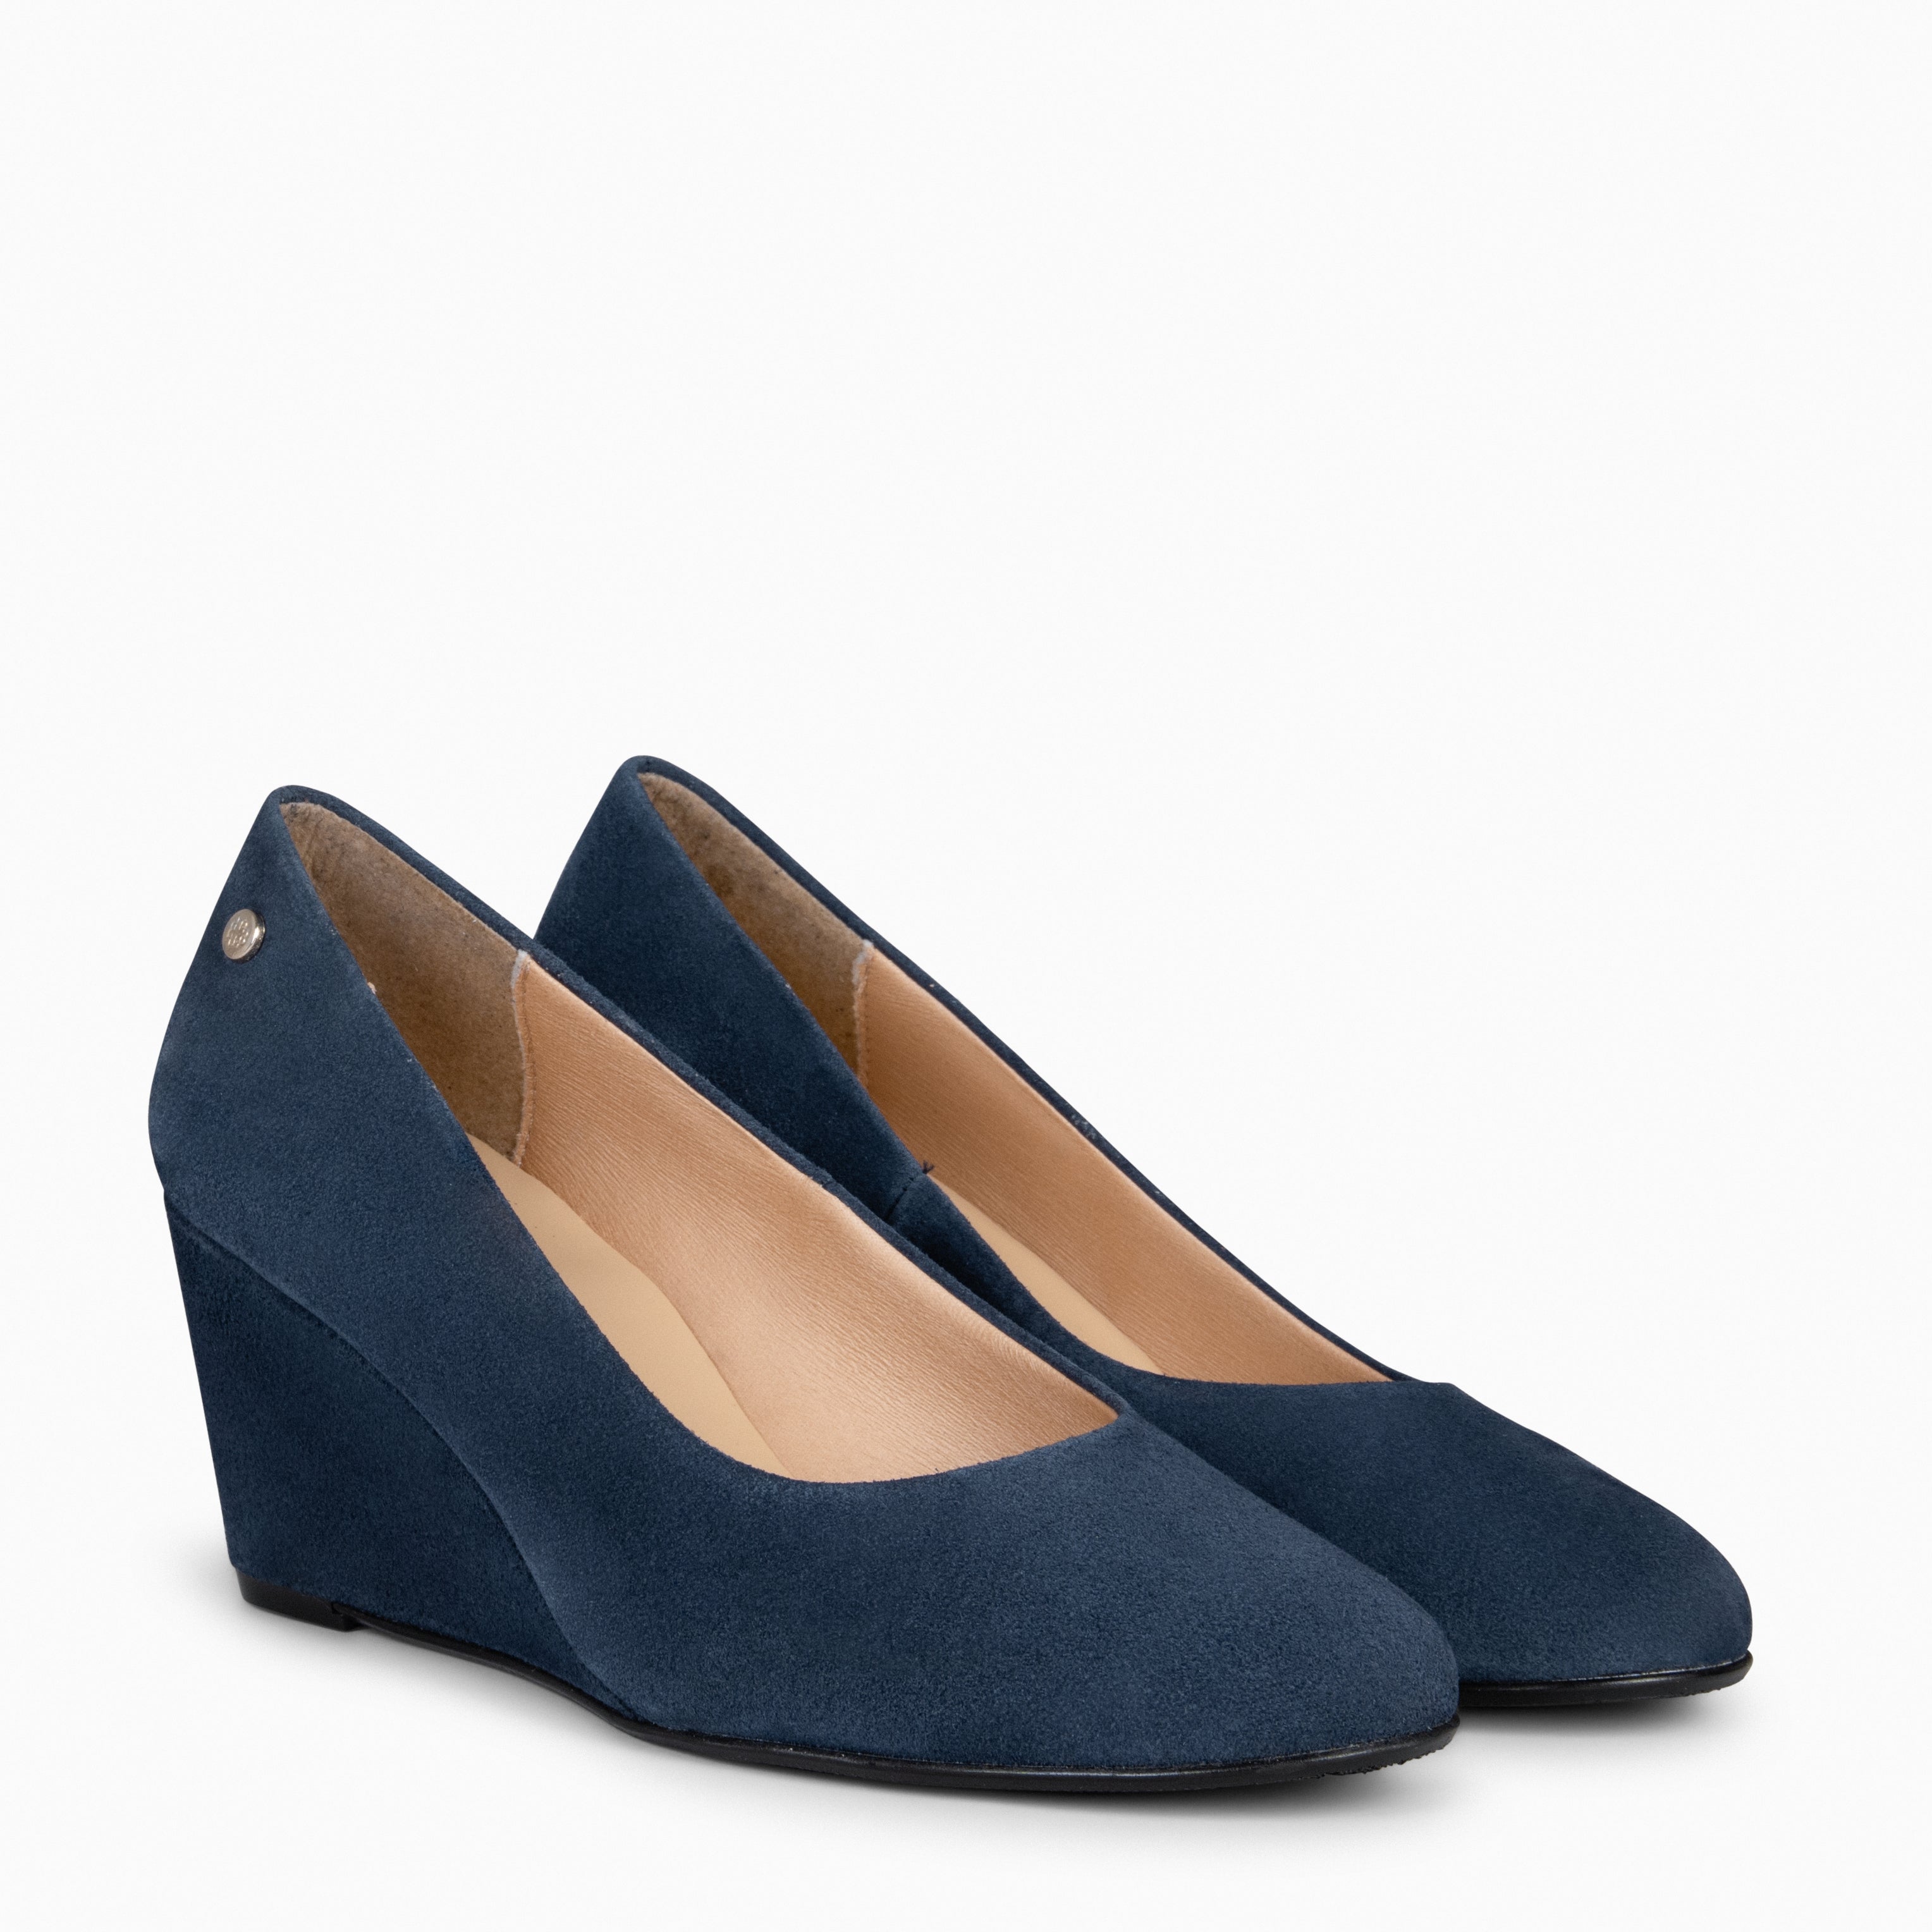 WEDGE ROUND – NAVY Shoes with wedge 